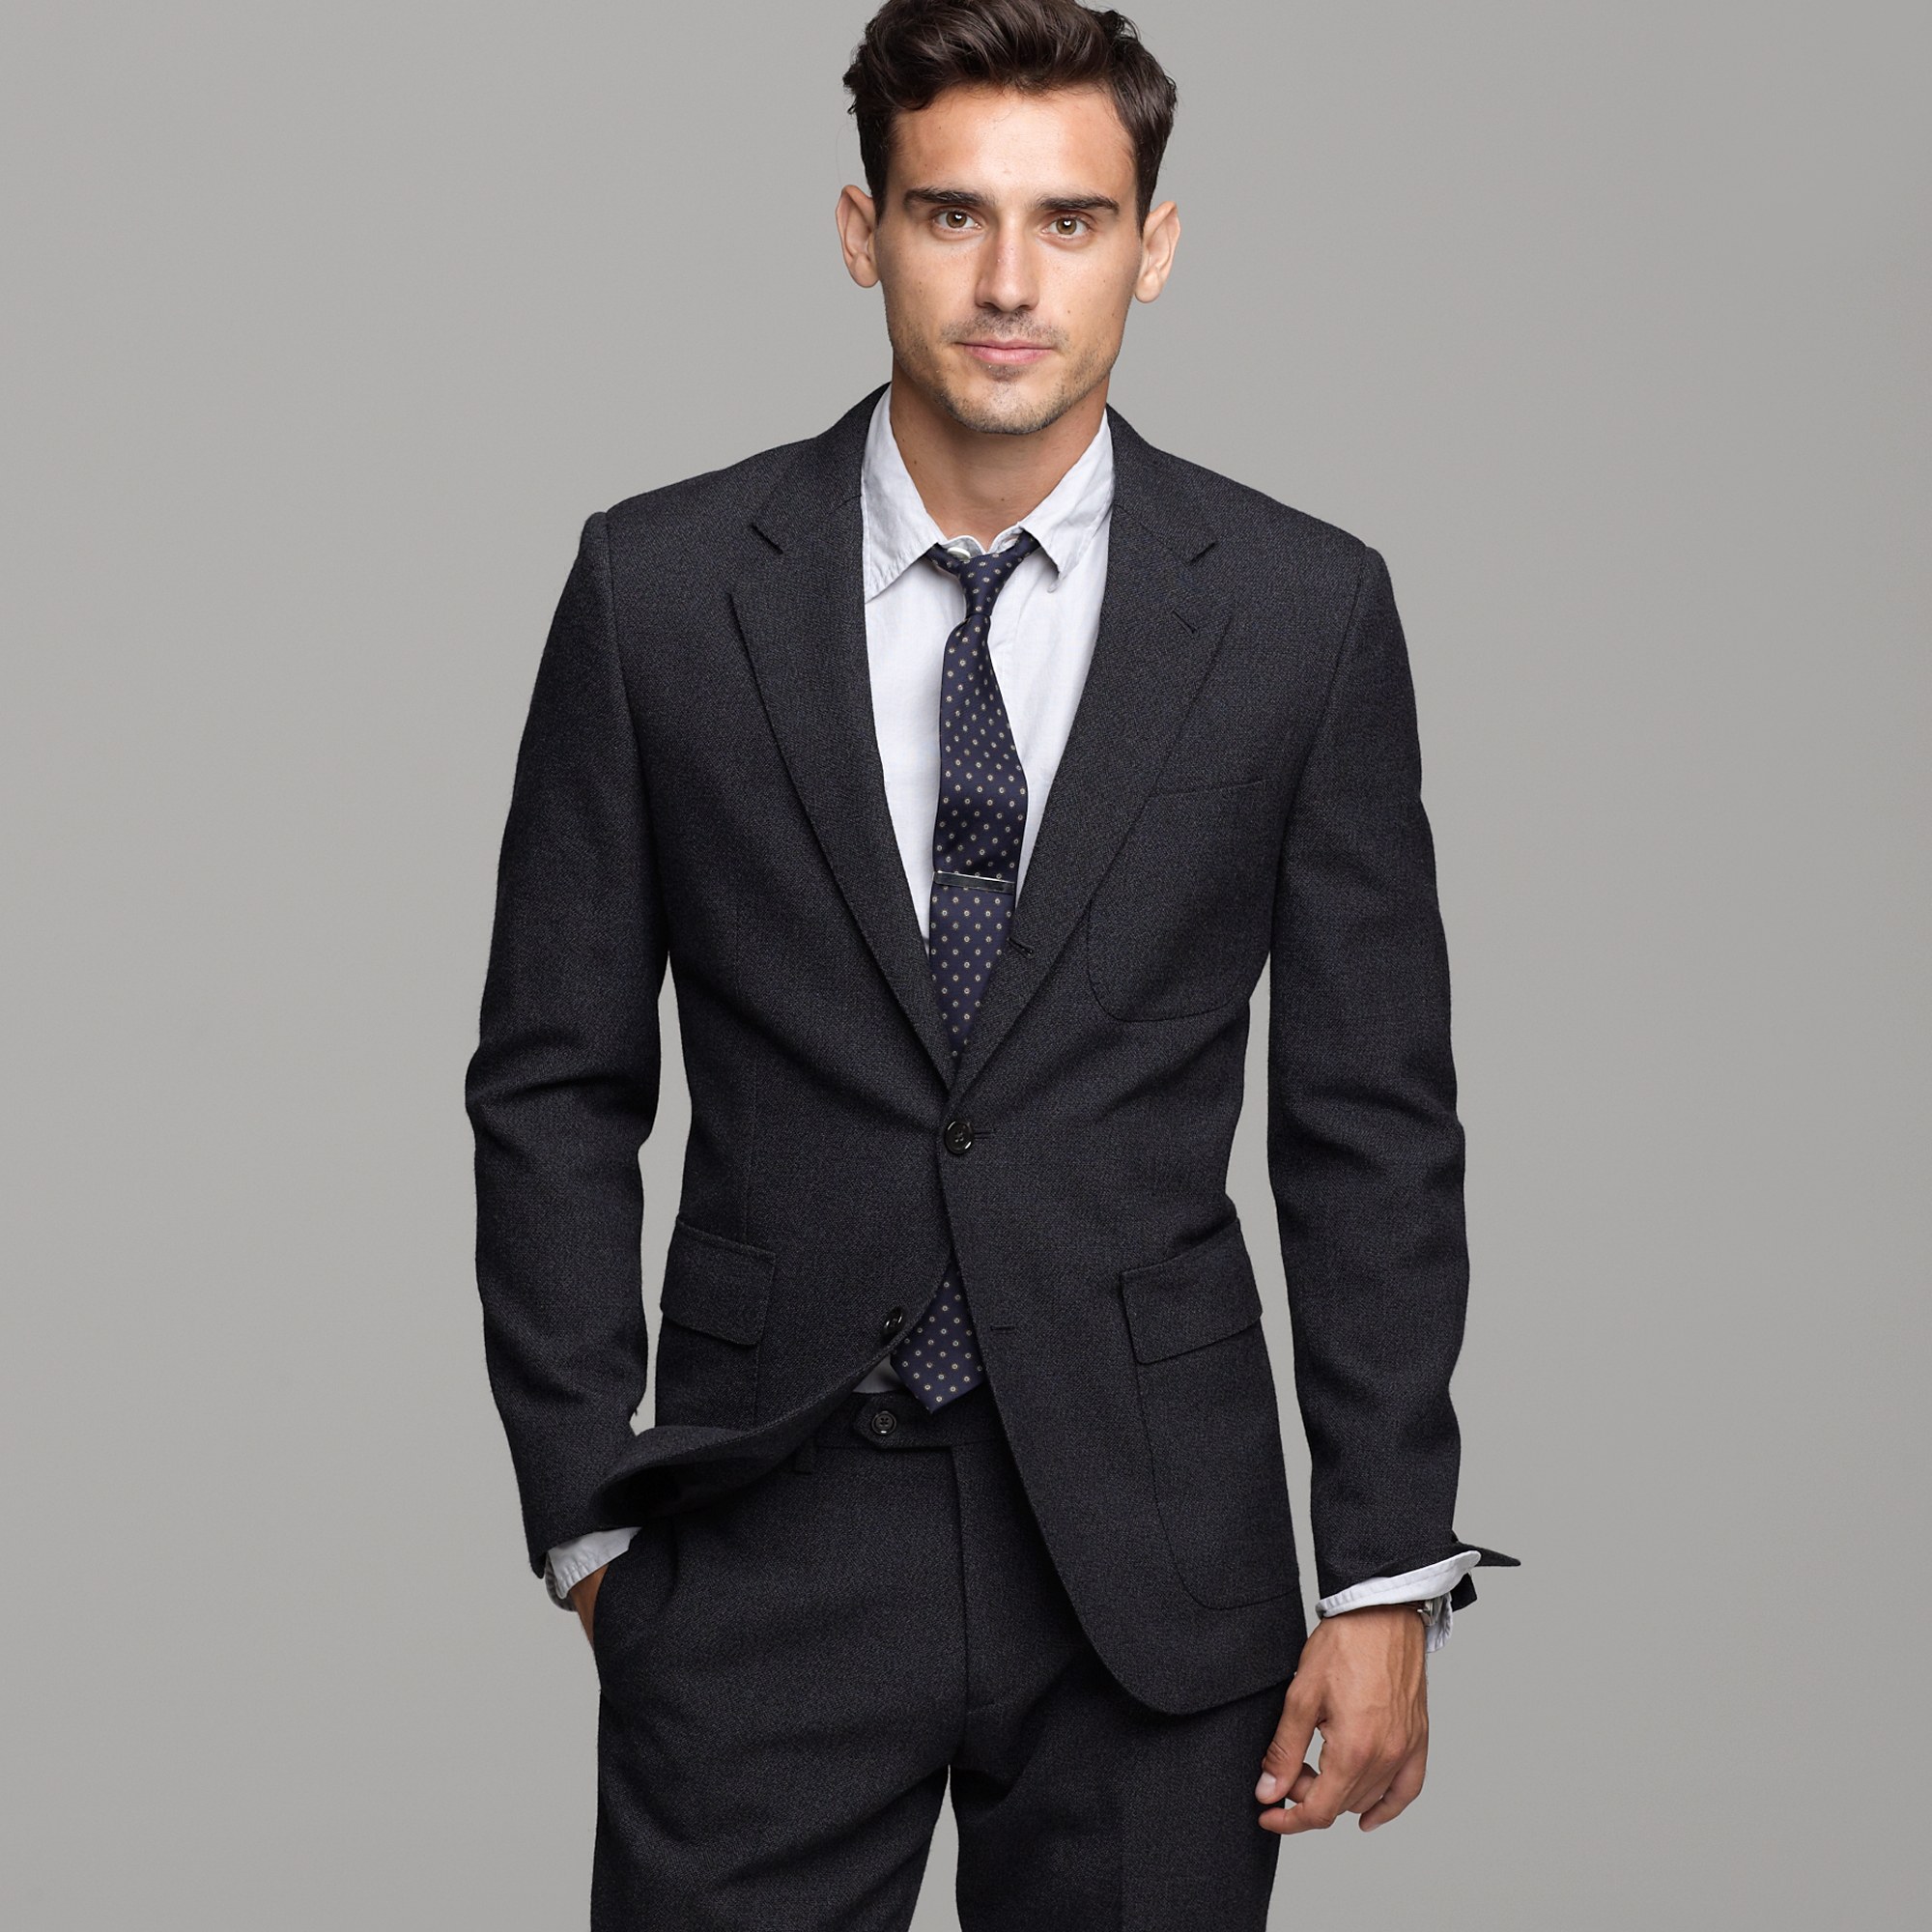 J.Crew Ludlow Three-button Suit Jacket with Double-vented Back in ...